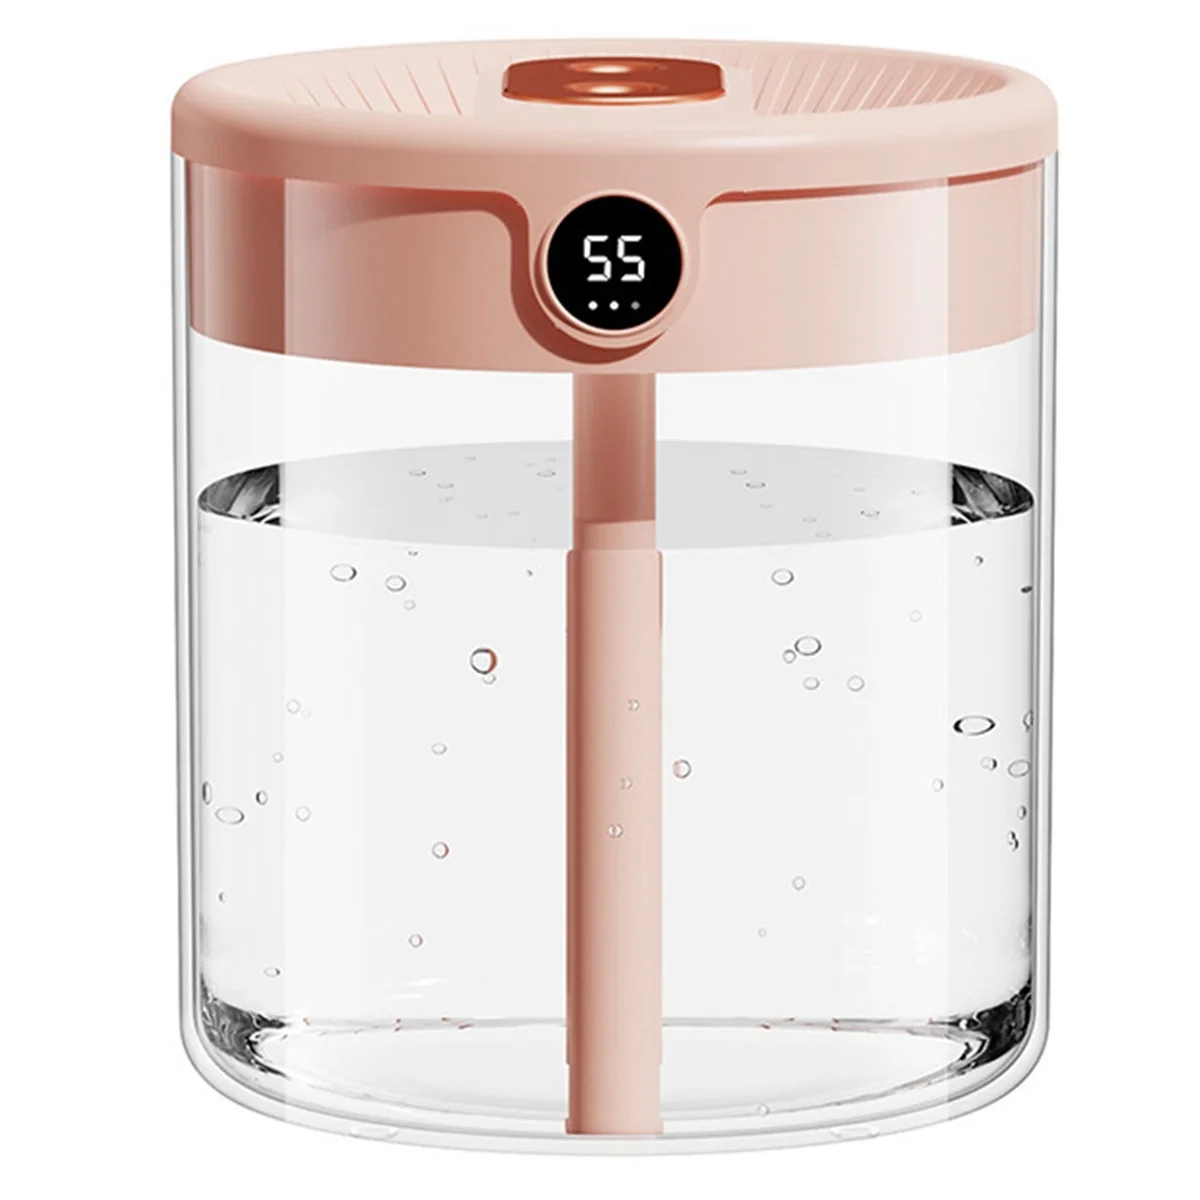 

H2O Air Humidifier 2L Capacity Double Nozzle with LCD Humidity Display Essential Oil Diffuser Portable USB,Pink